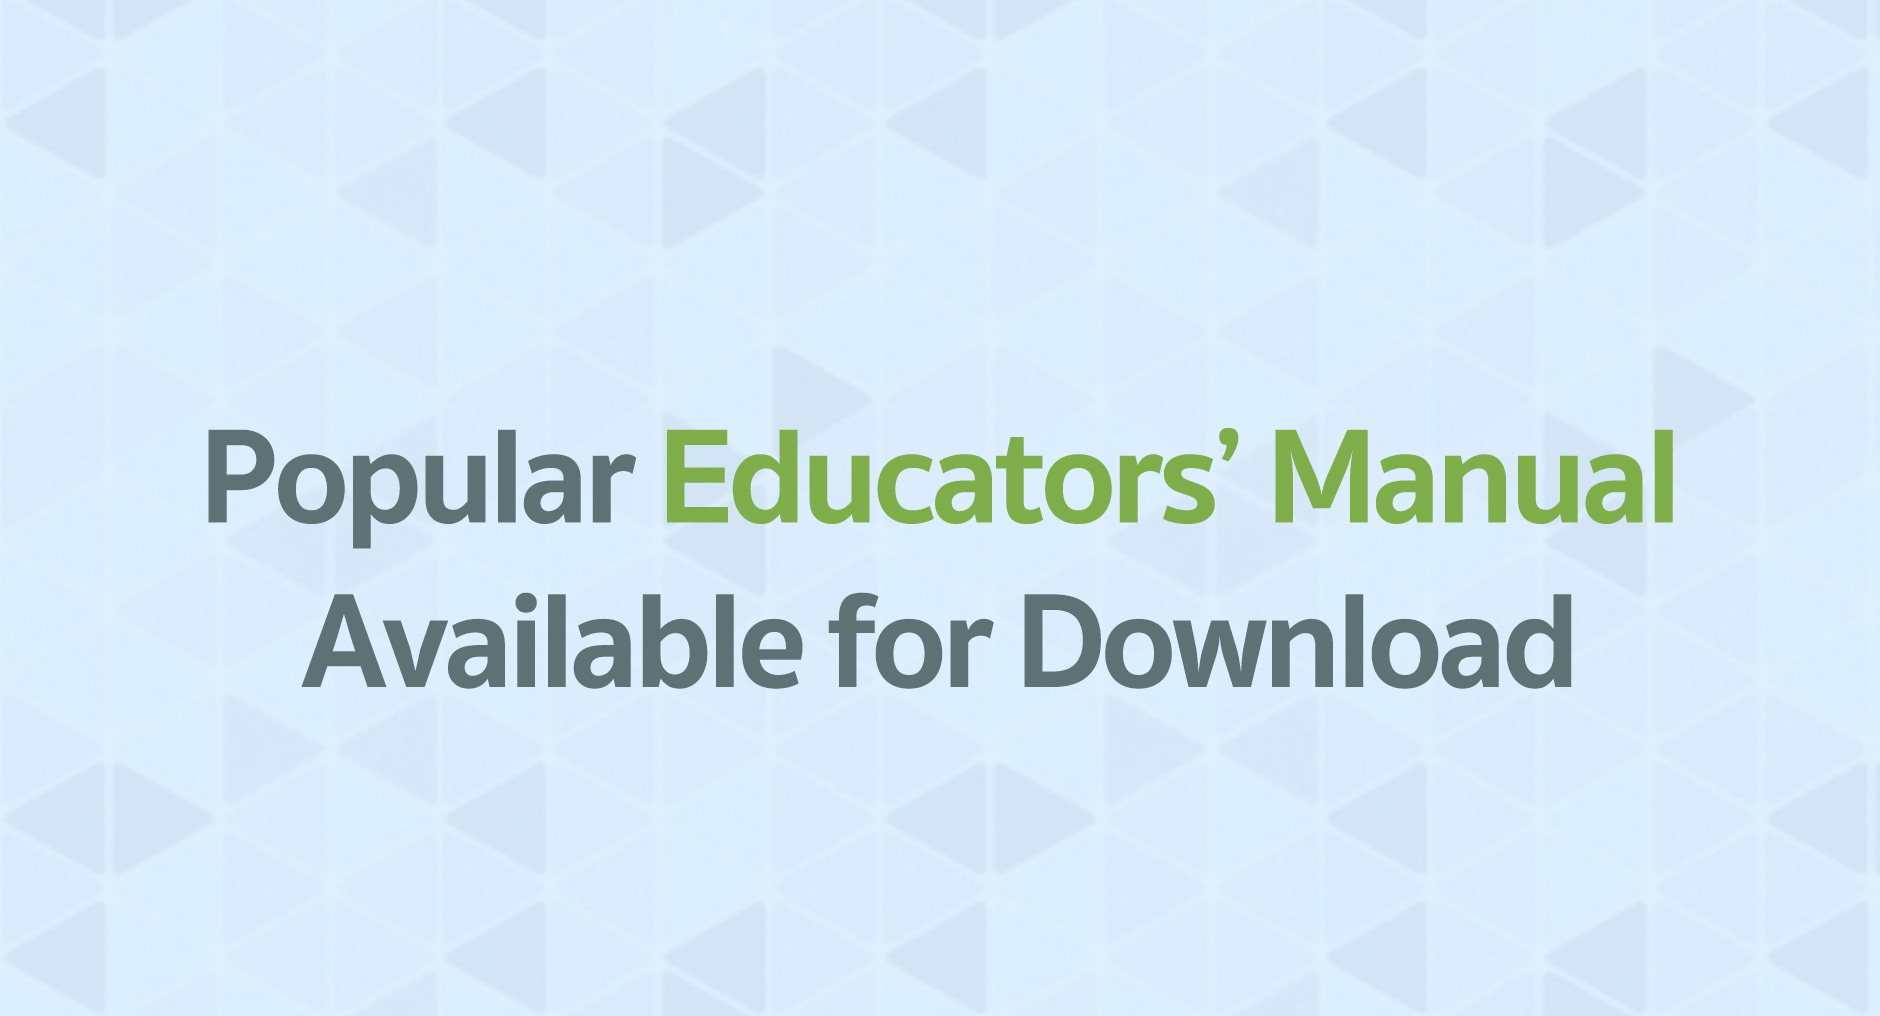 Popular Educators Manual Available for Download